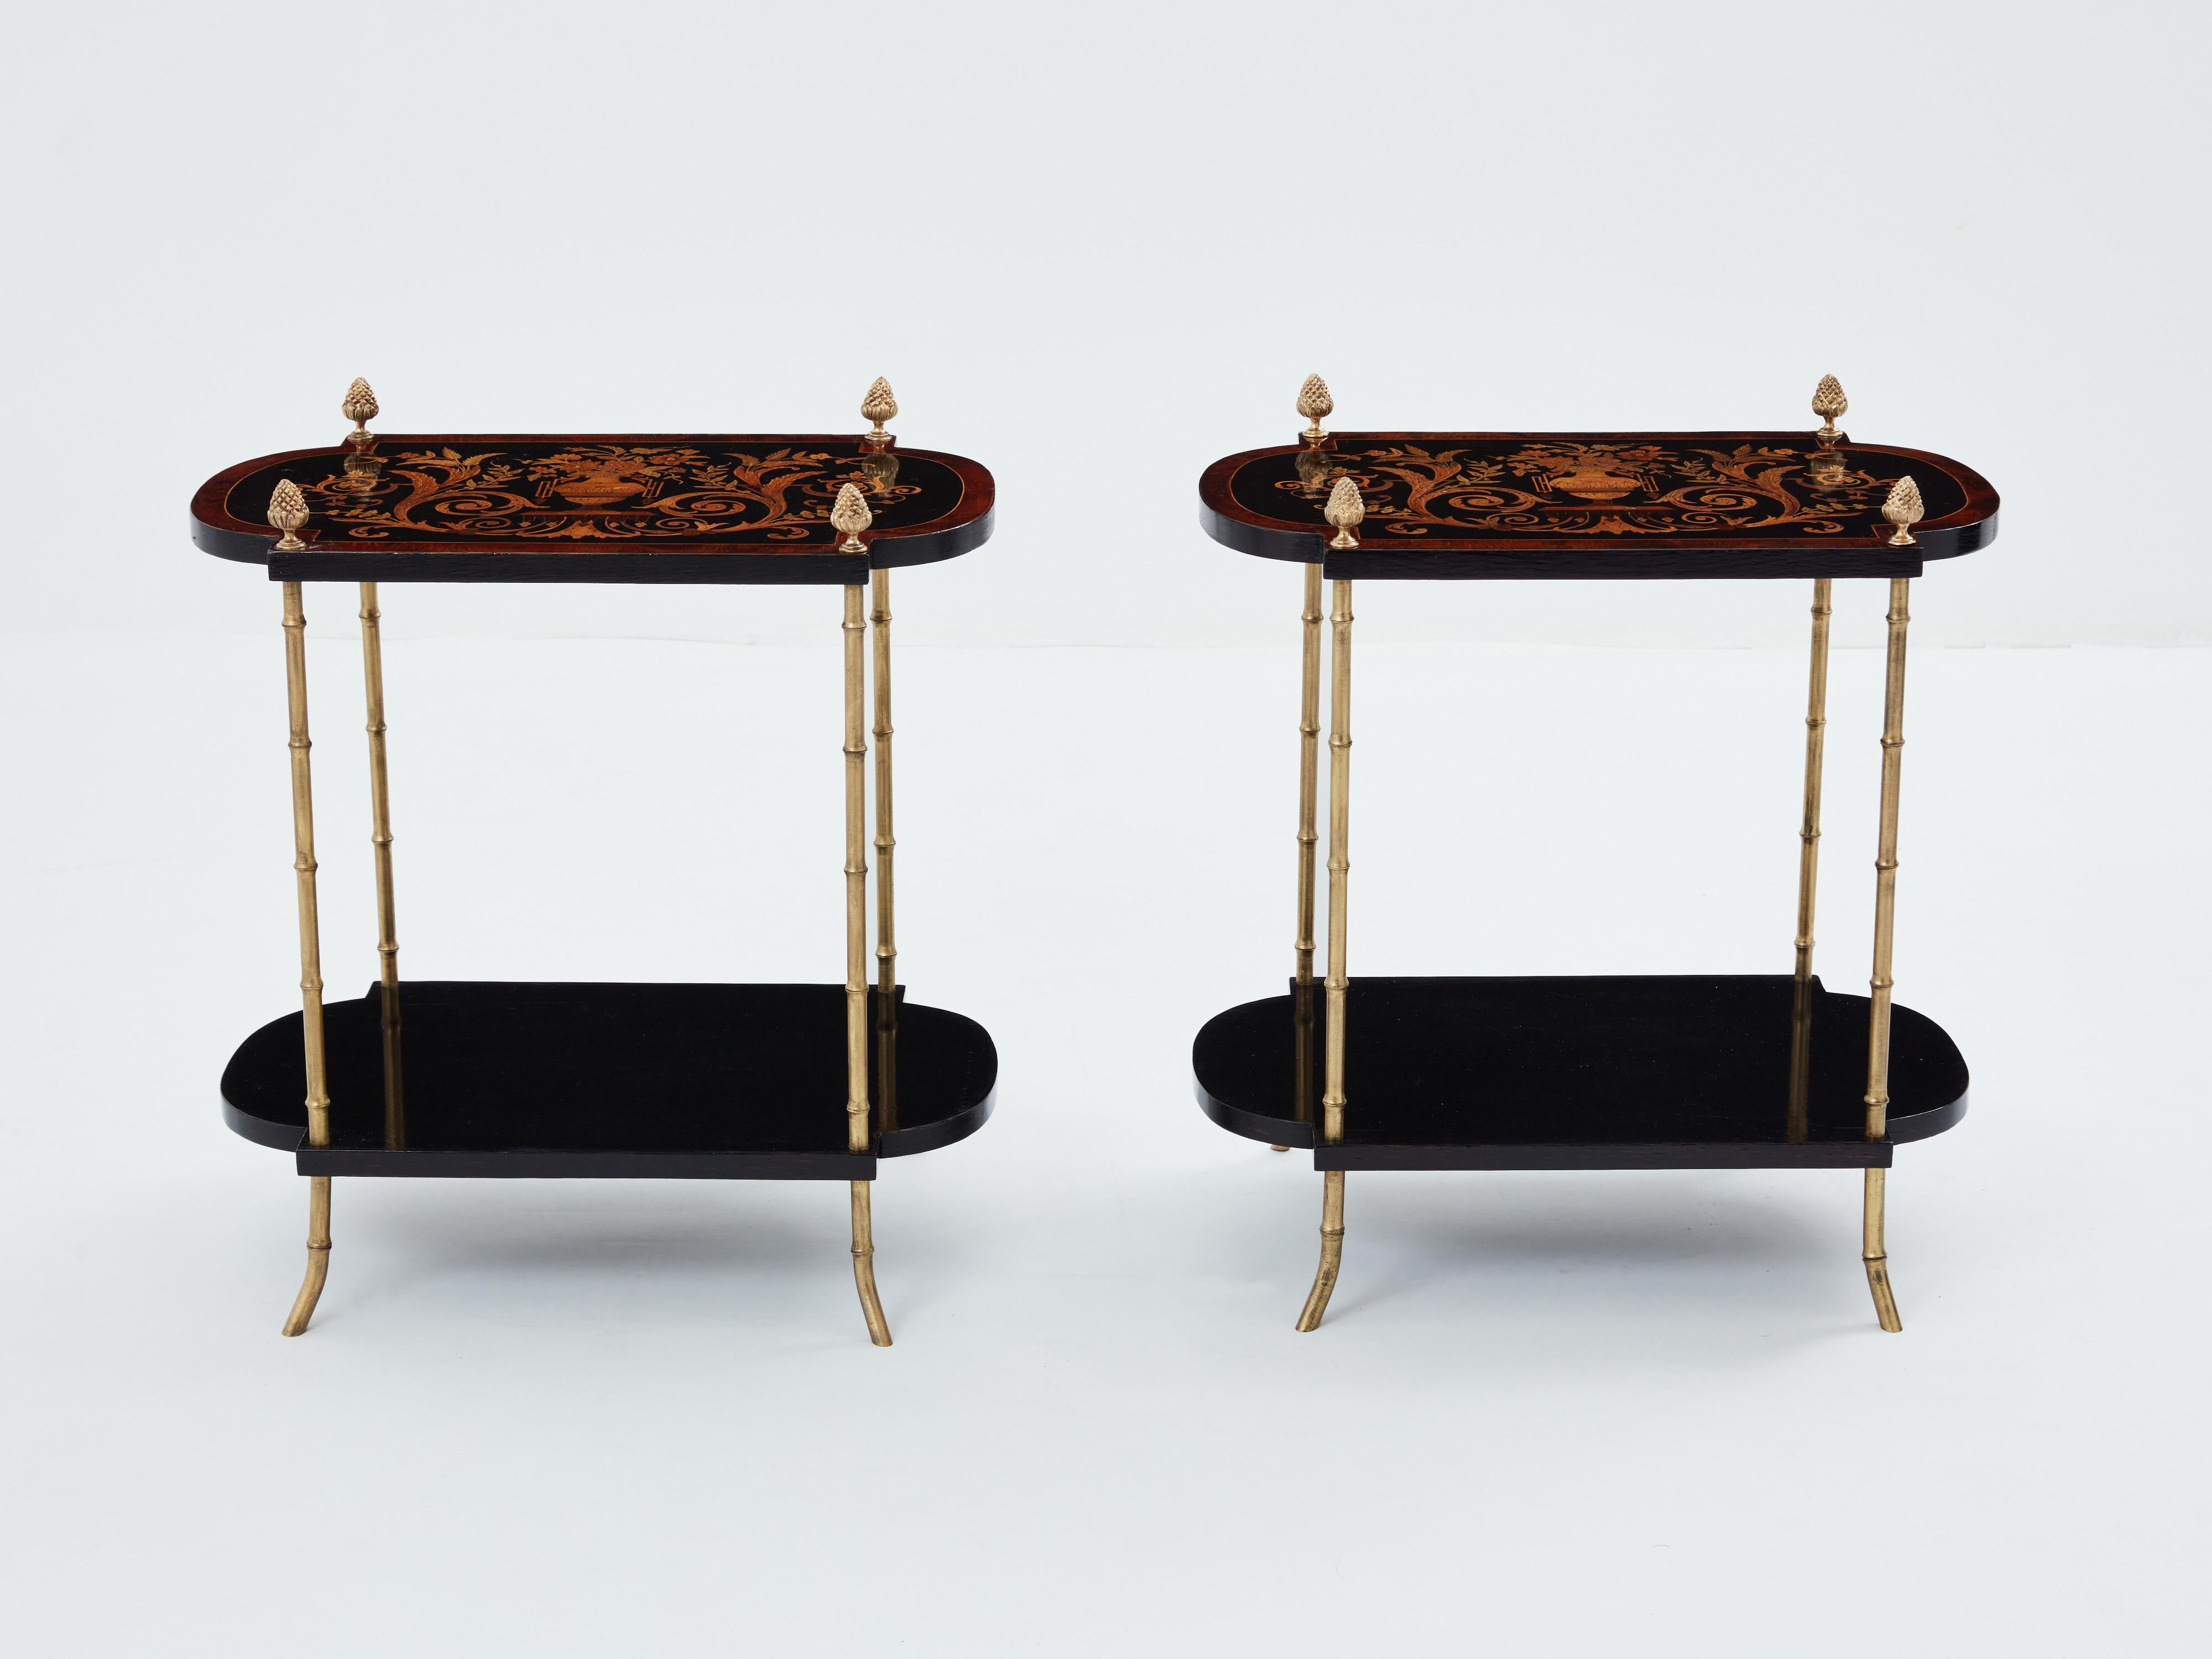 Maison Baguès bronze bamboo wood marquetry side tables 1940s For Sale 2